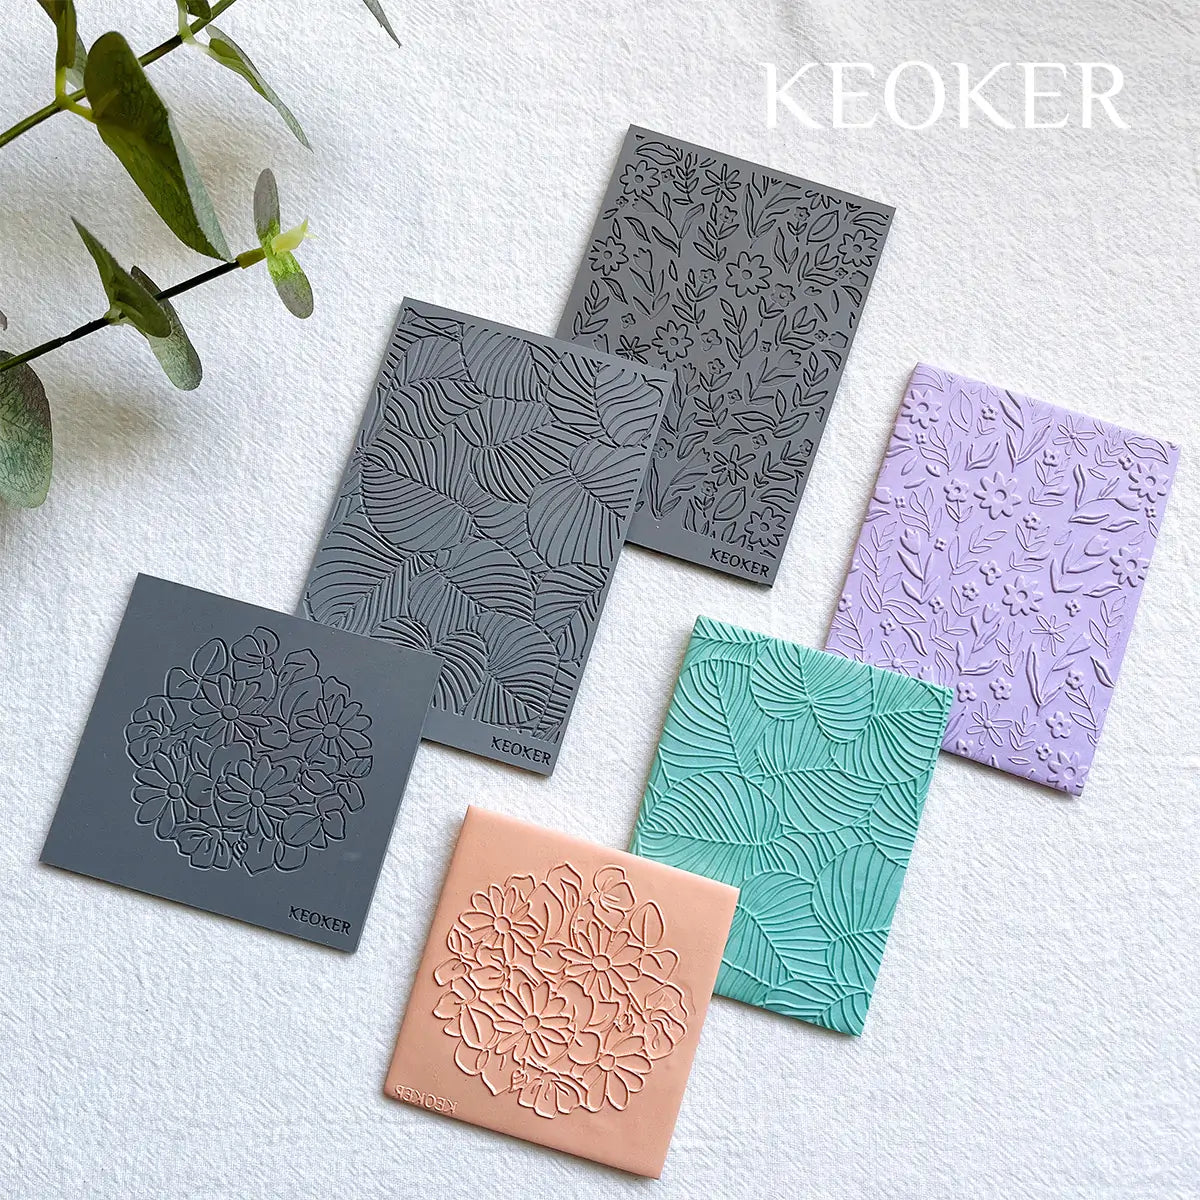 KEOKER Polymer Clay Texture Roller, 3PC Clay Texture Roller for Polymer  Clay Earrings Tools (3 Sample Pack)